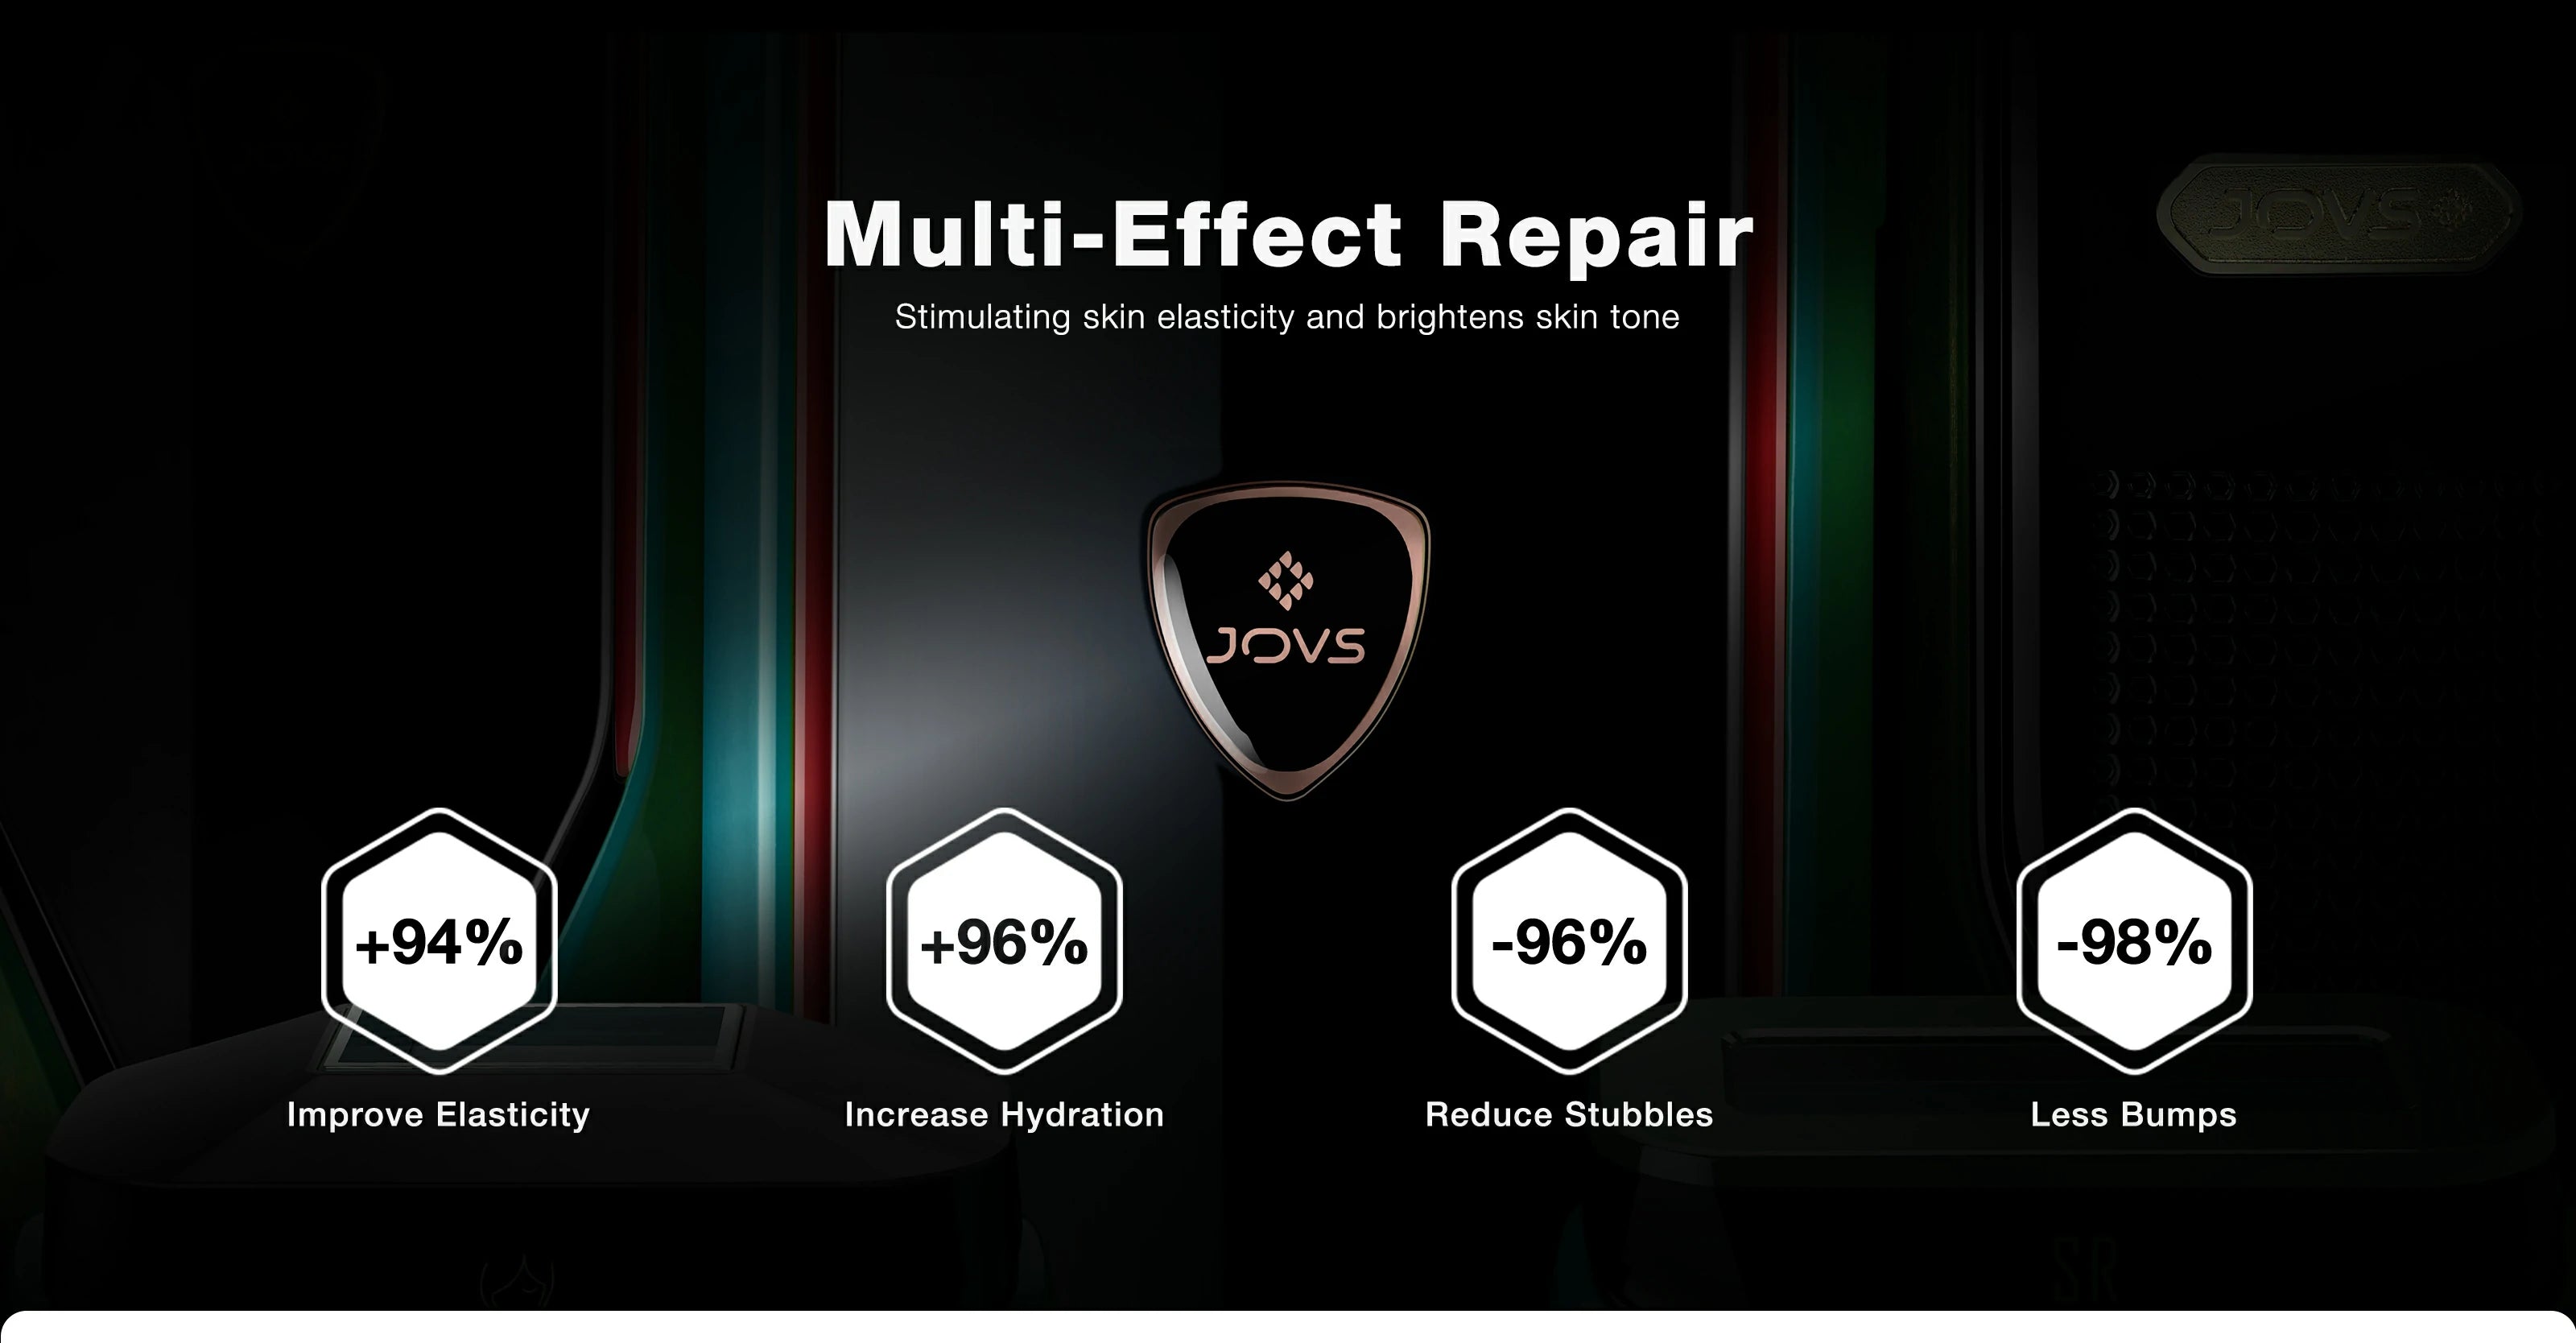 JOVS X™ showcases impressive skin repair statistics, with significant improvements in skin elasticity, hydration, and reduction in stubbles and bumps.